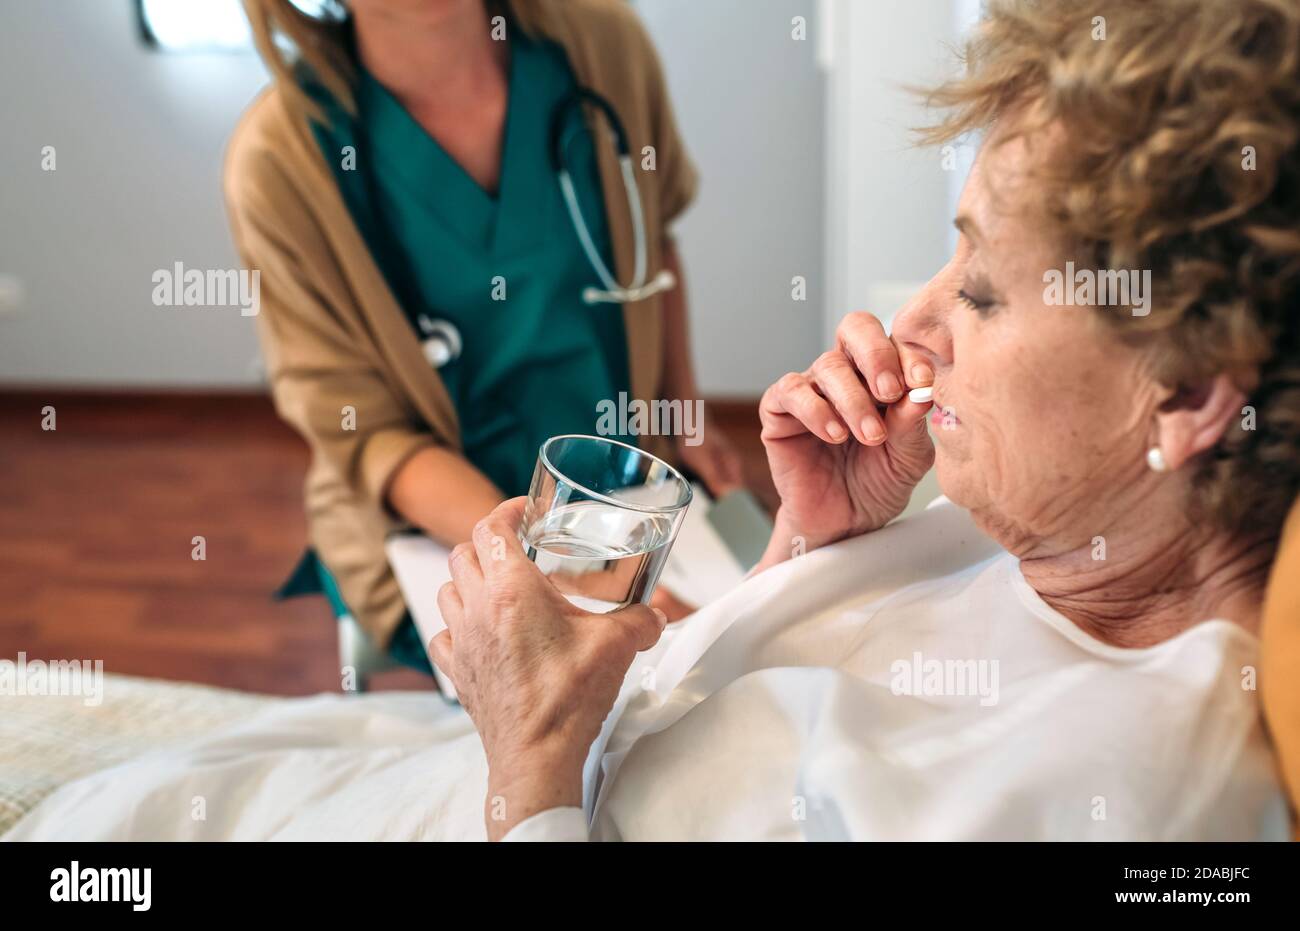 Senior patient taking a pill Stock Photo